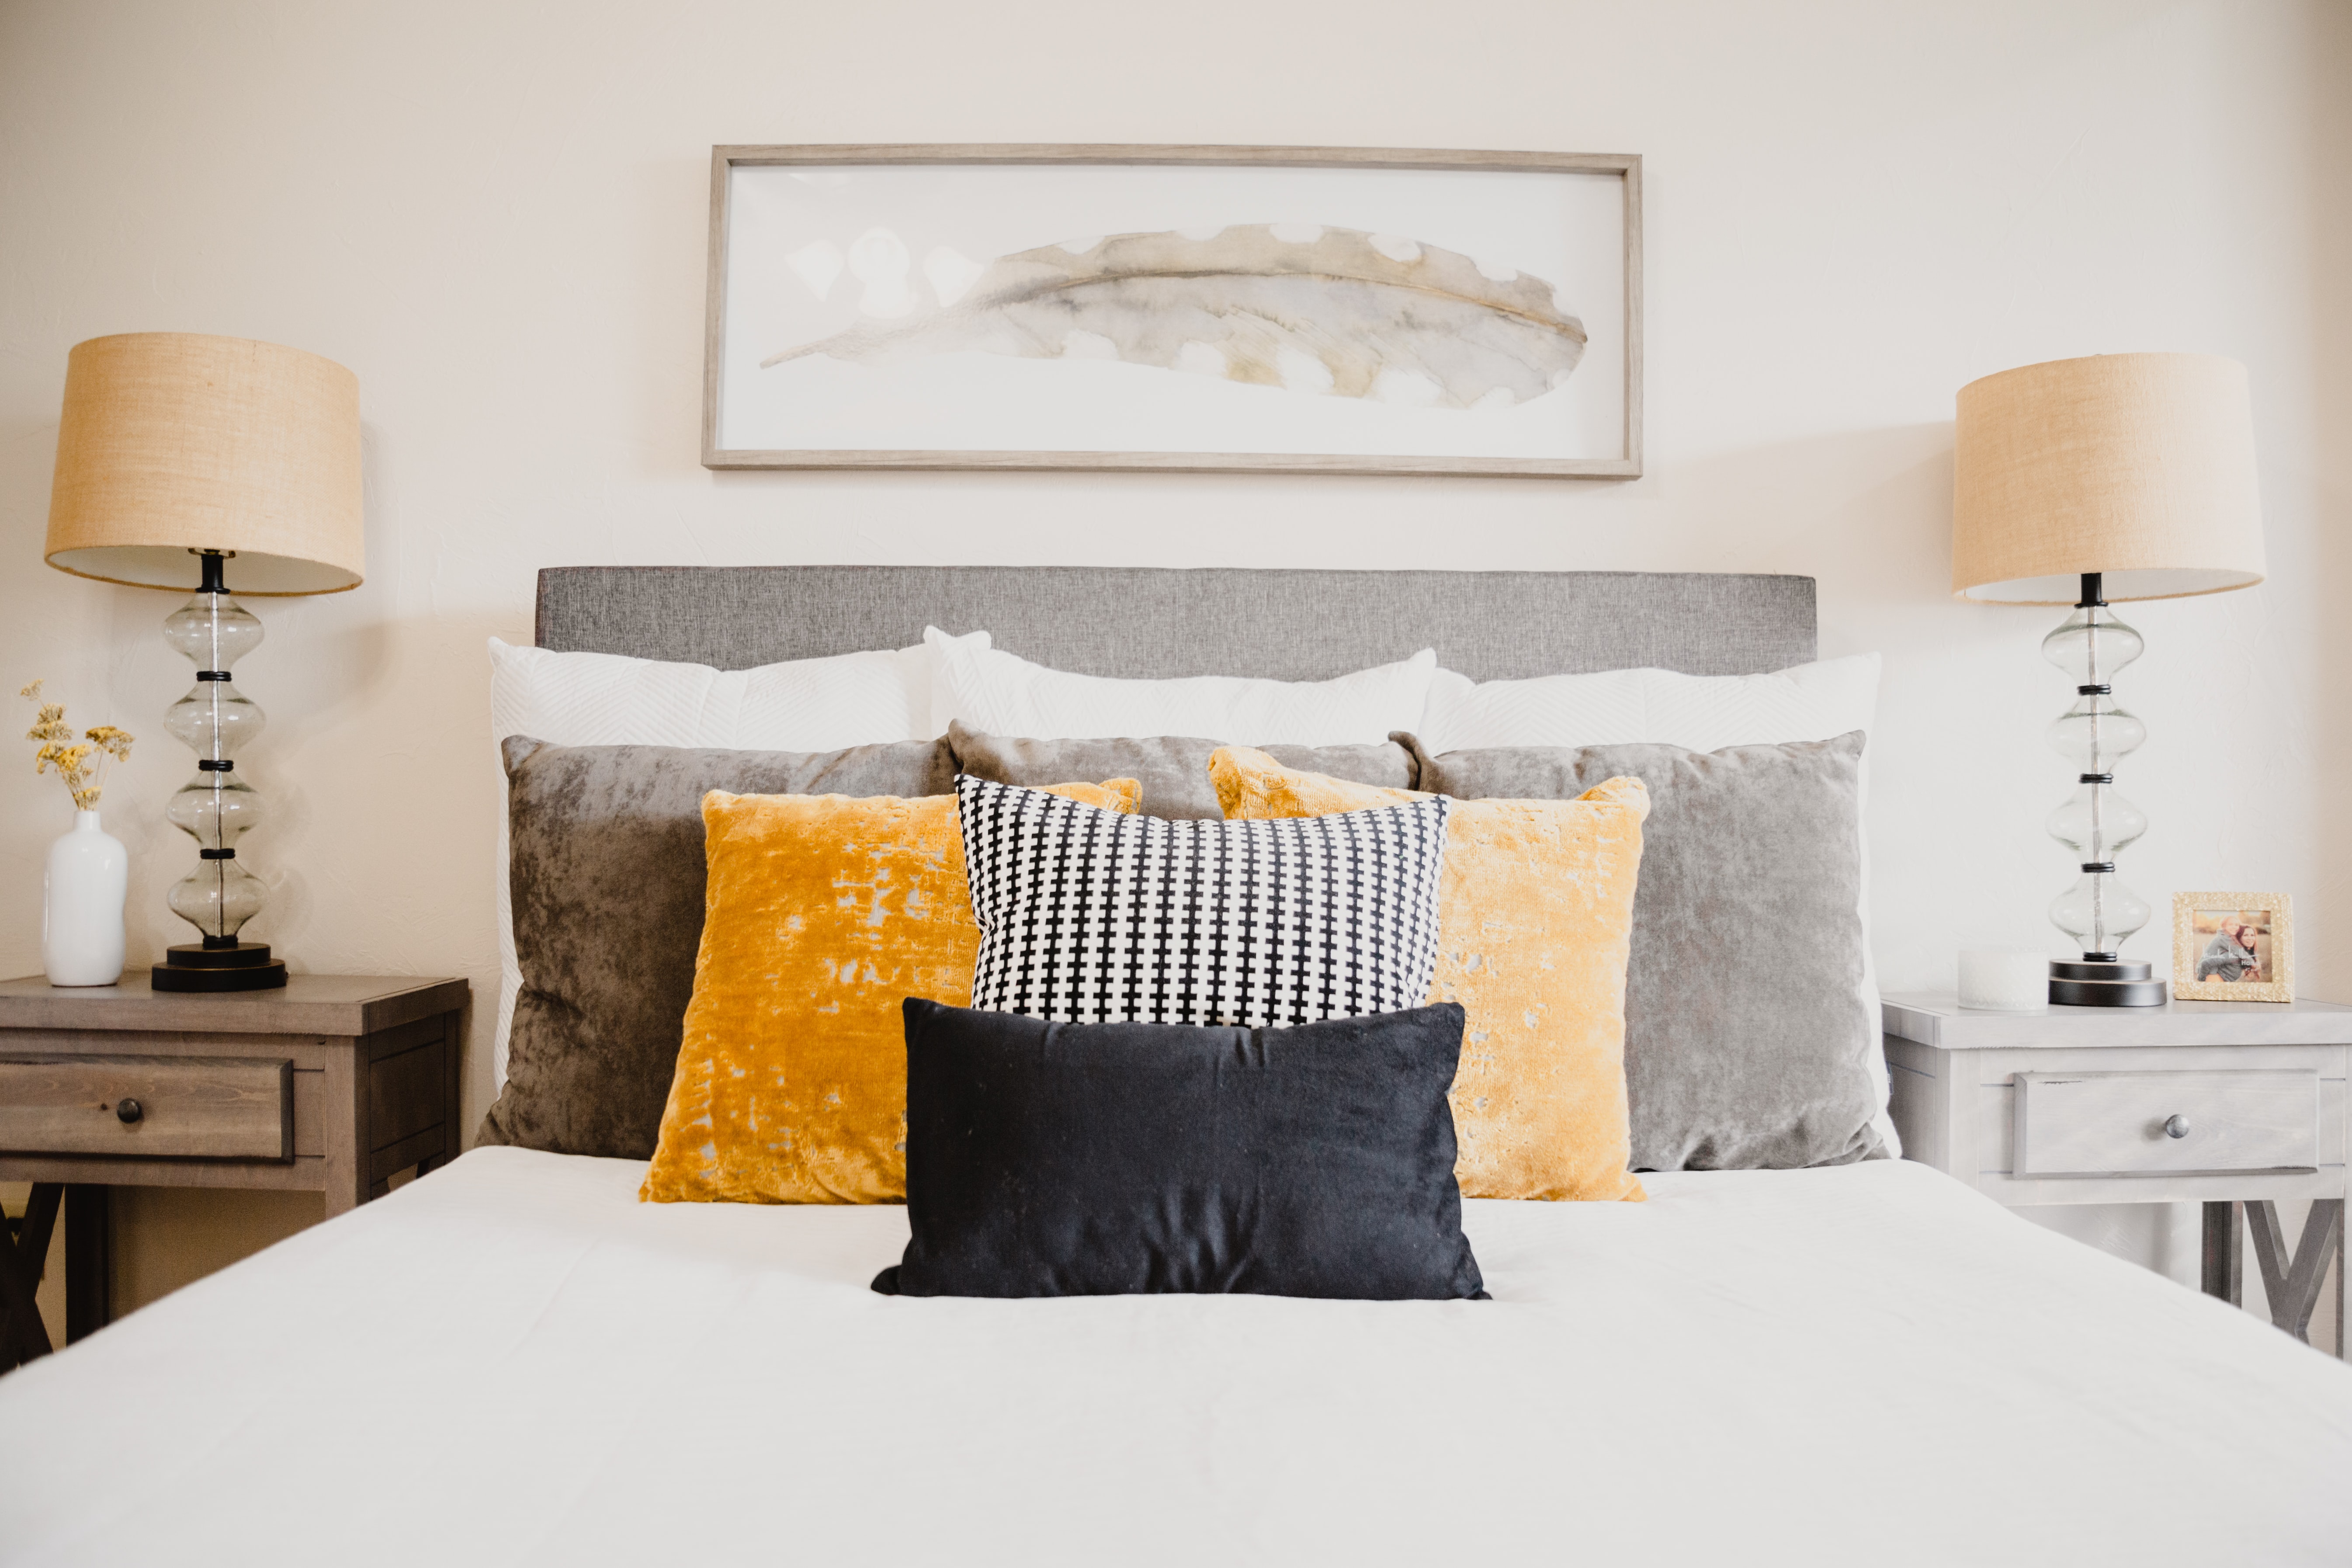 How to Mix and Match Throw Pillows Like a Pro